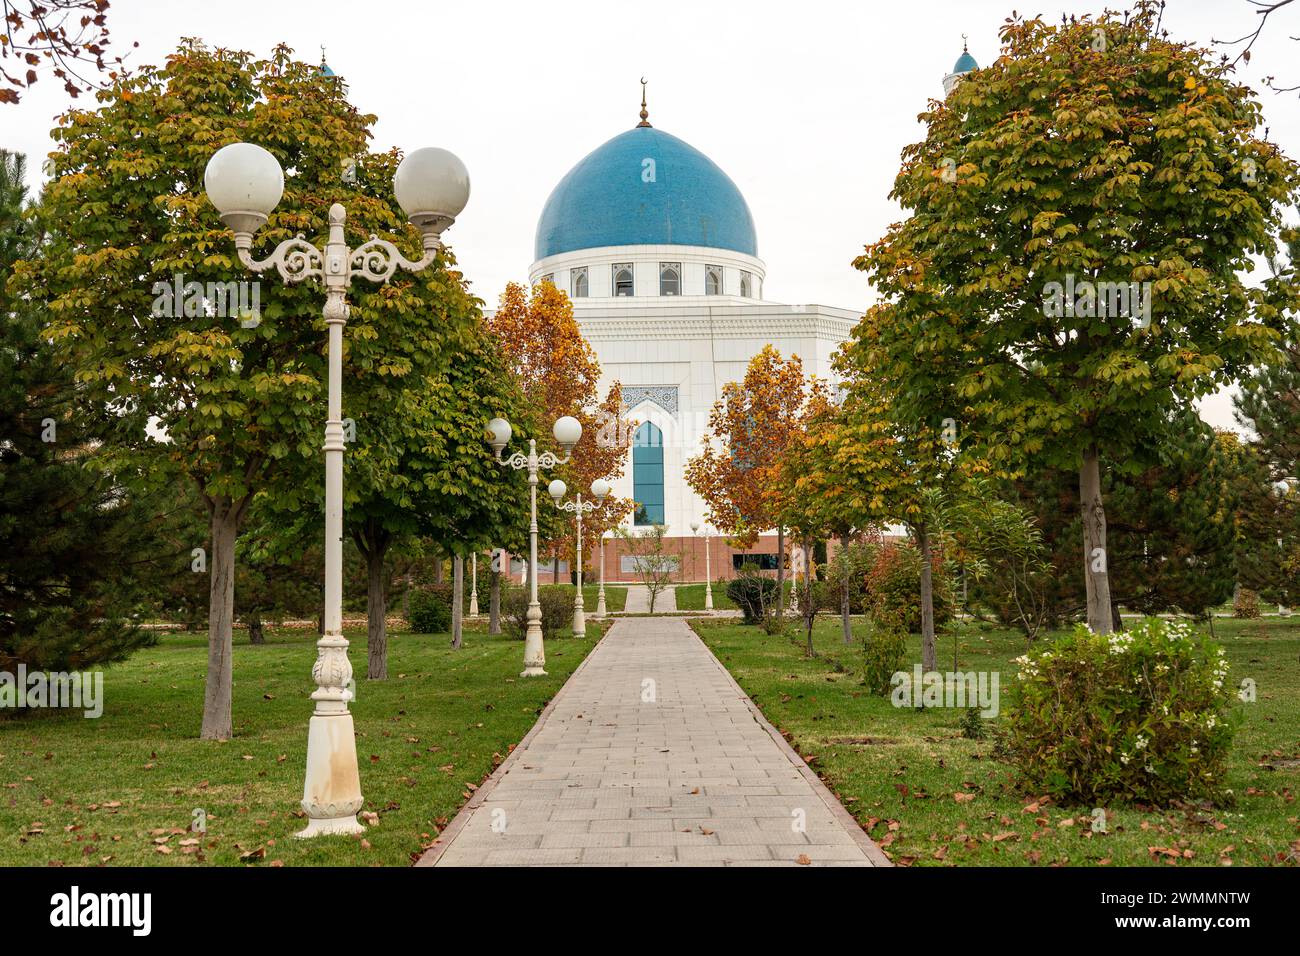 New large white mosque in summer with two minarets against a cloudy sky. Mosque Minor, Tashkent, Uzbekistan. Stock Photo